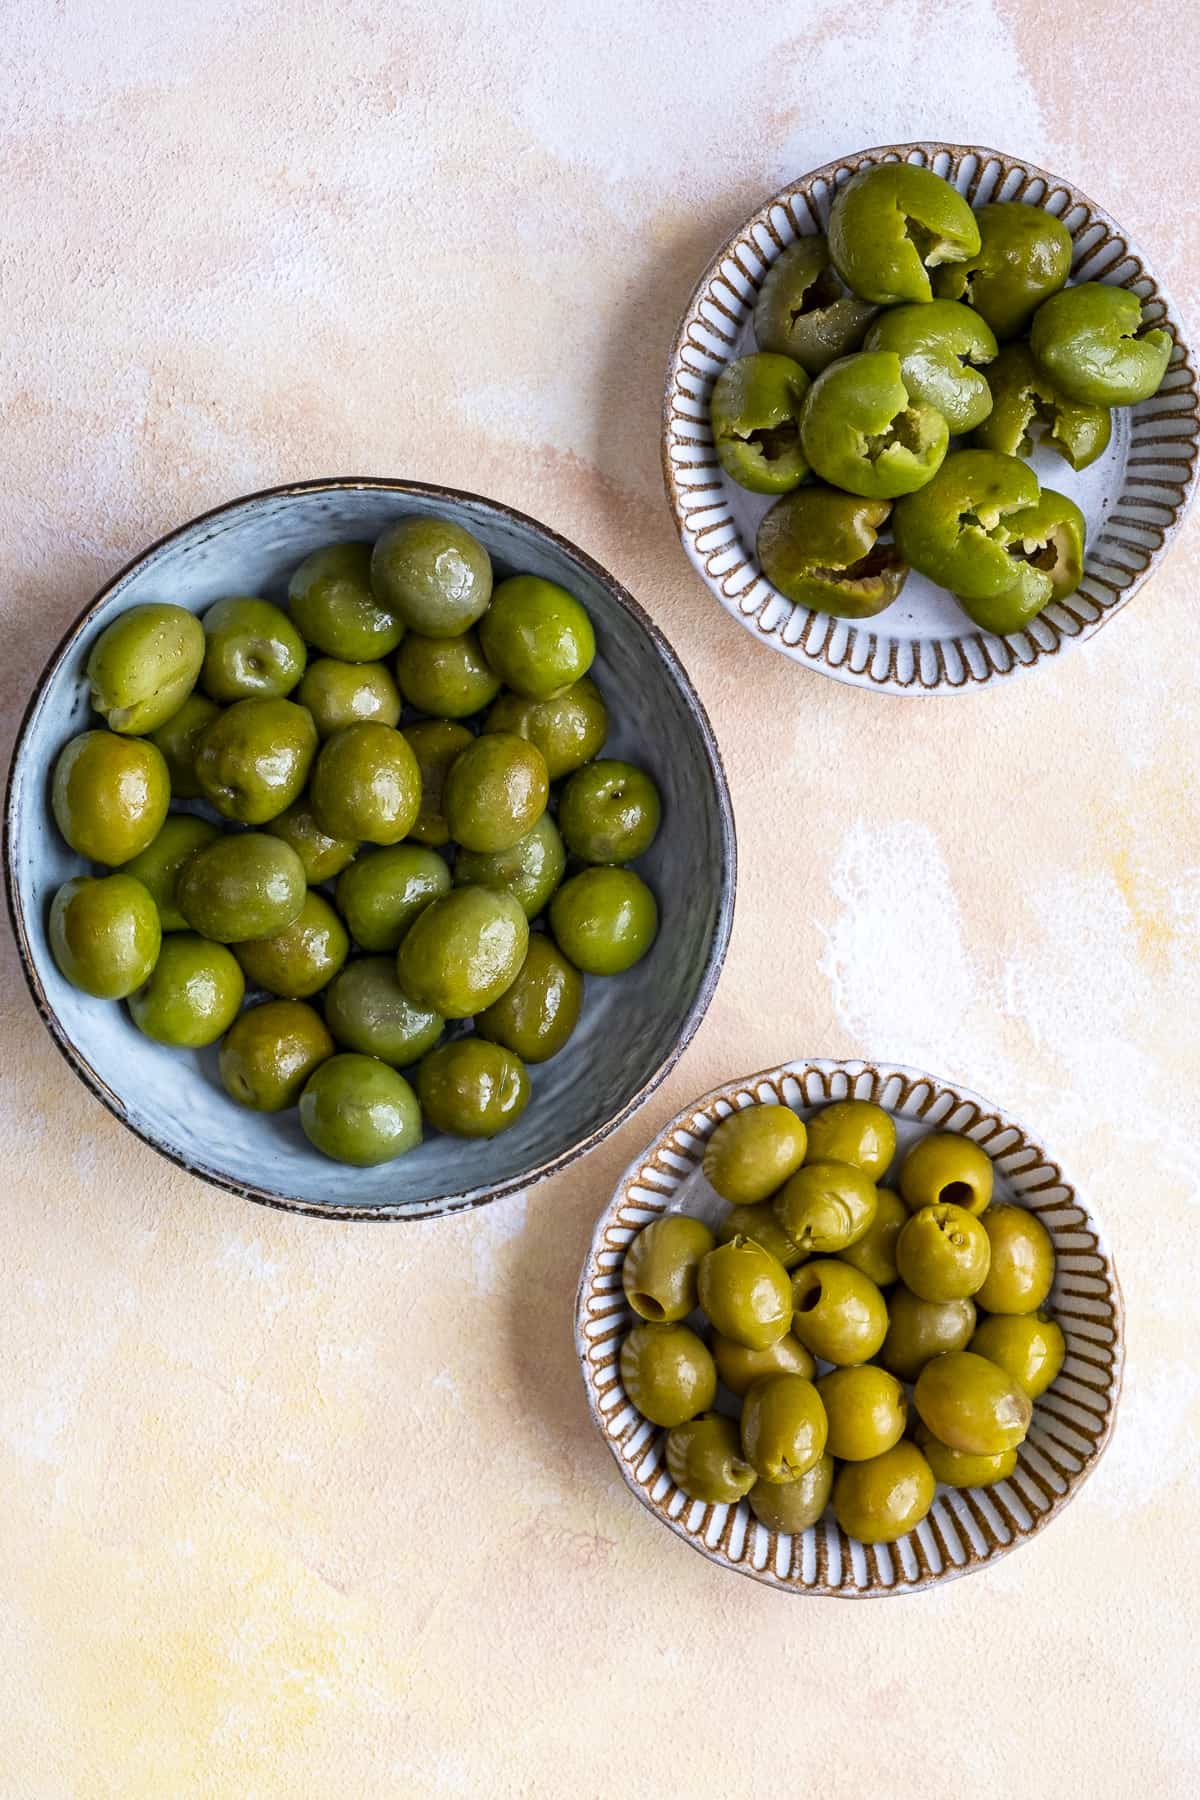 Whole green olives and pitted green olives in three bowls.